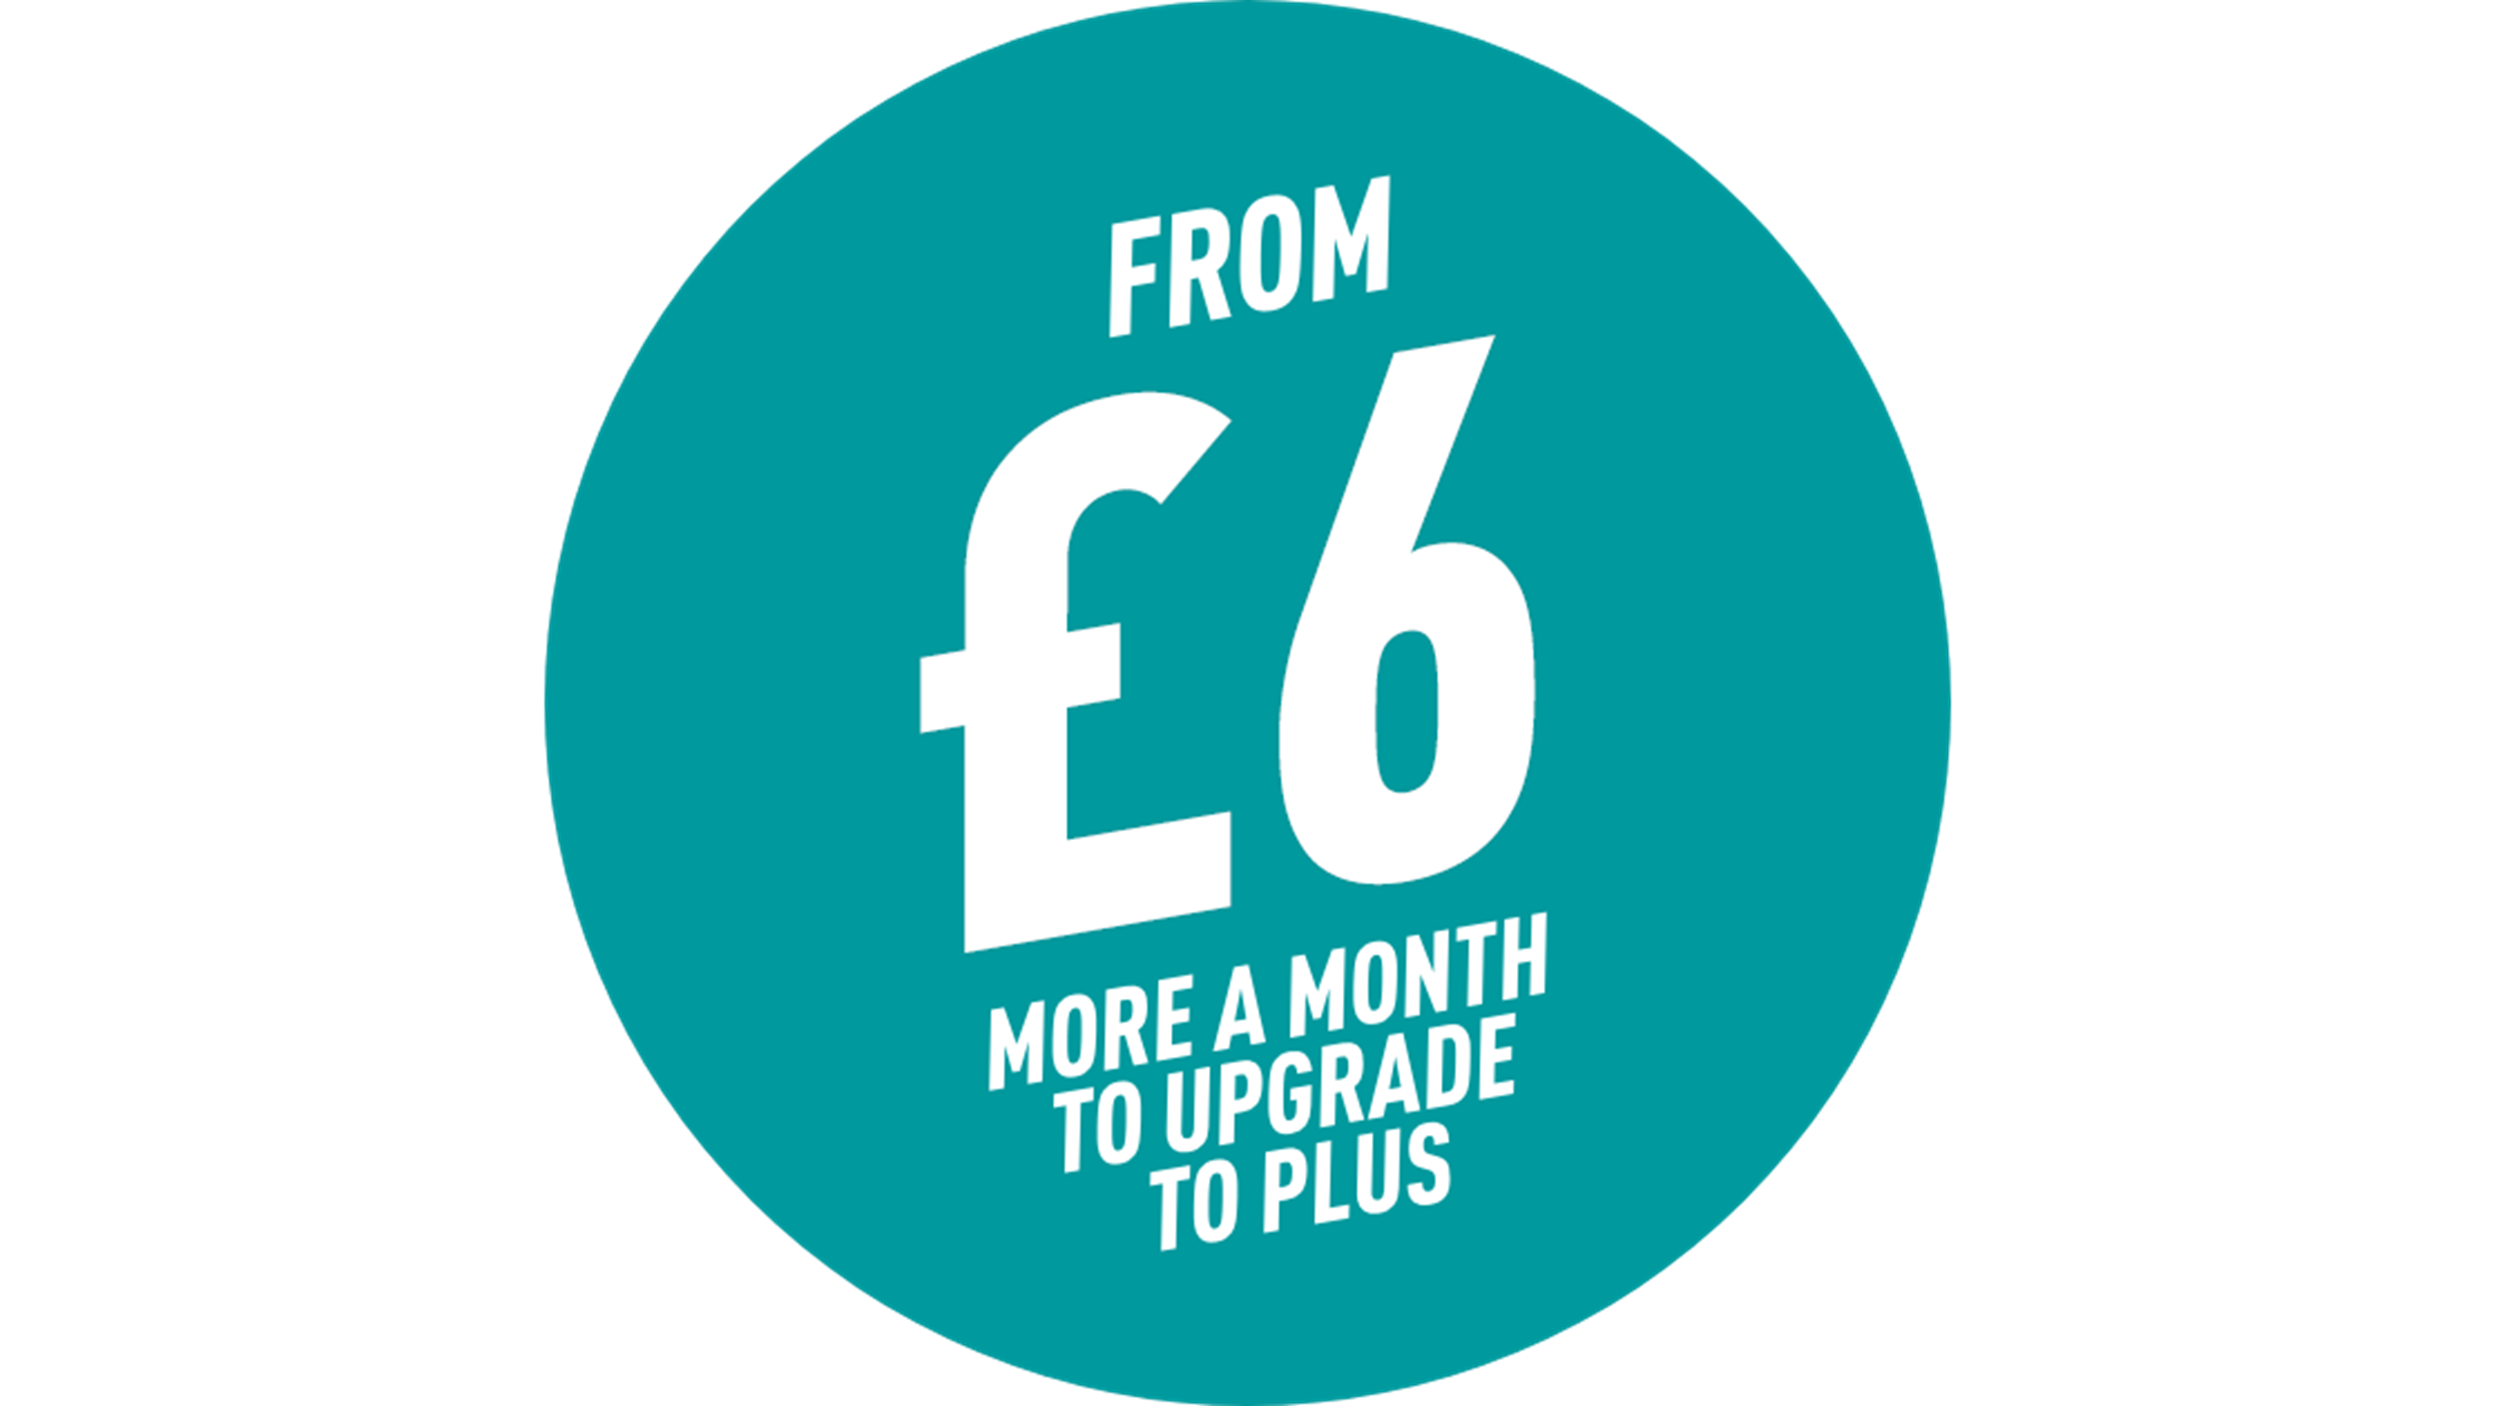 From £5 more a month to upgrade to Plus